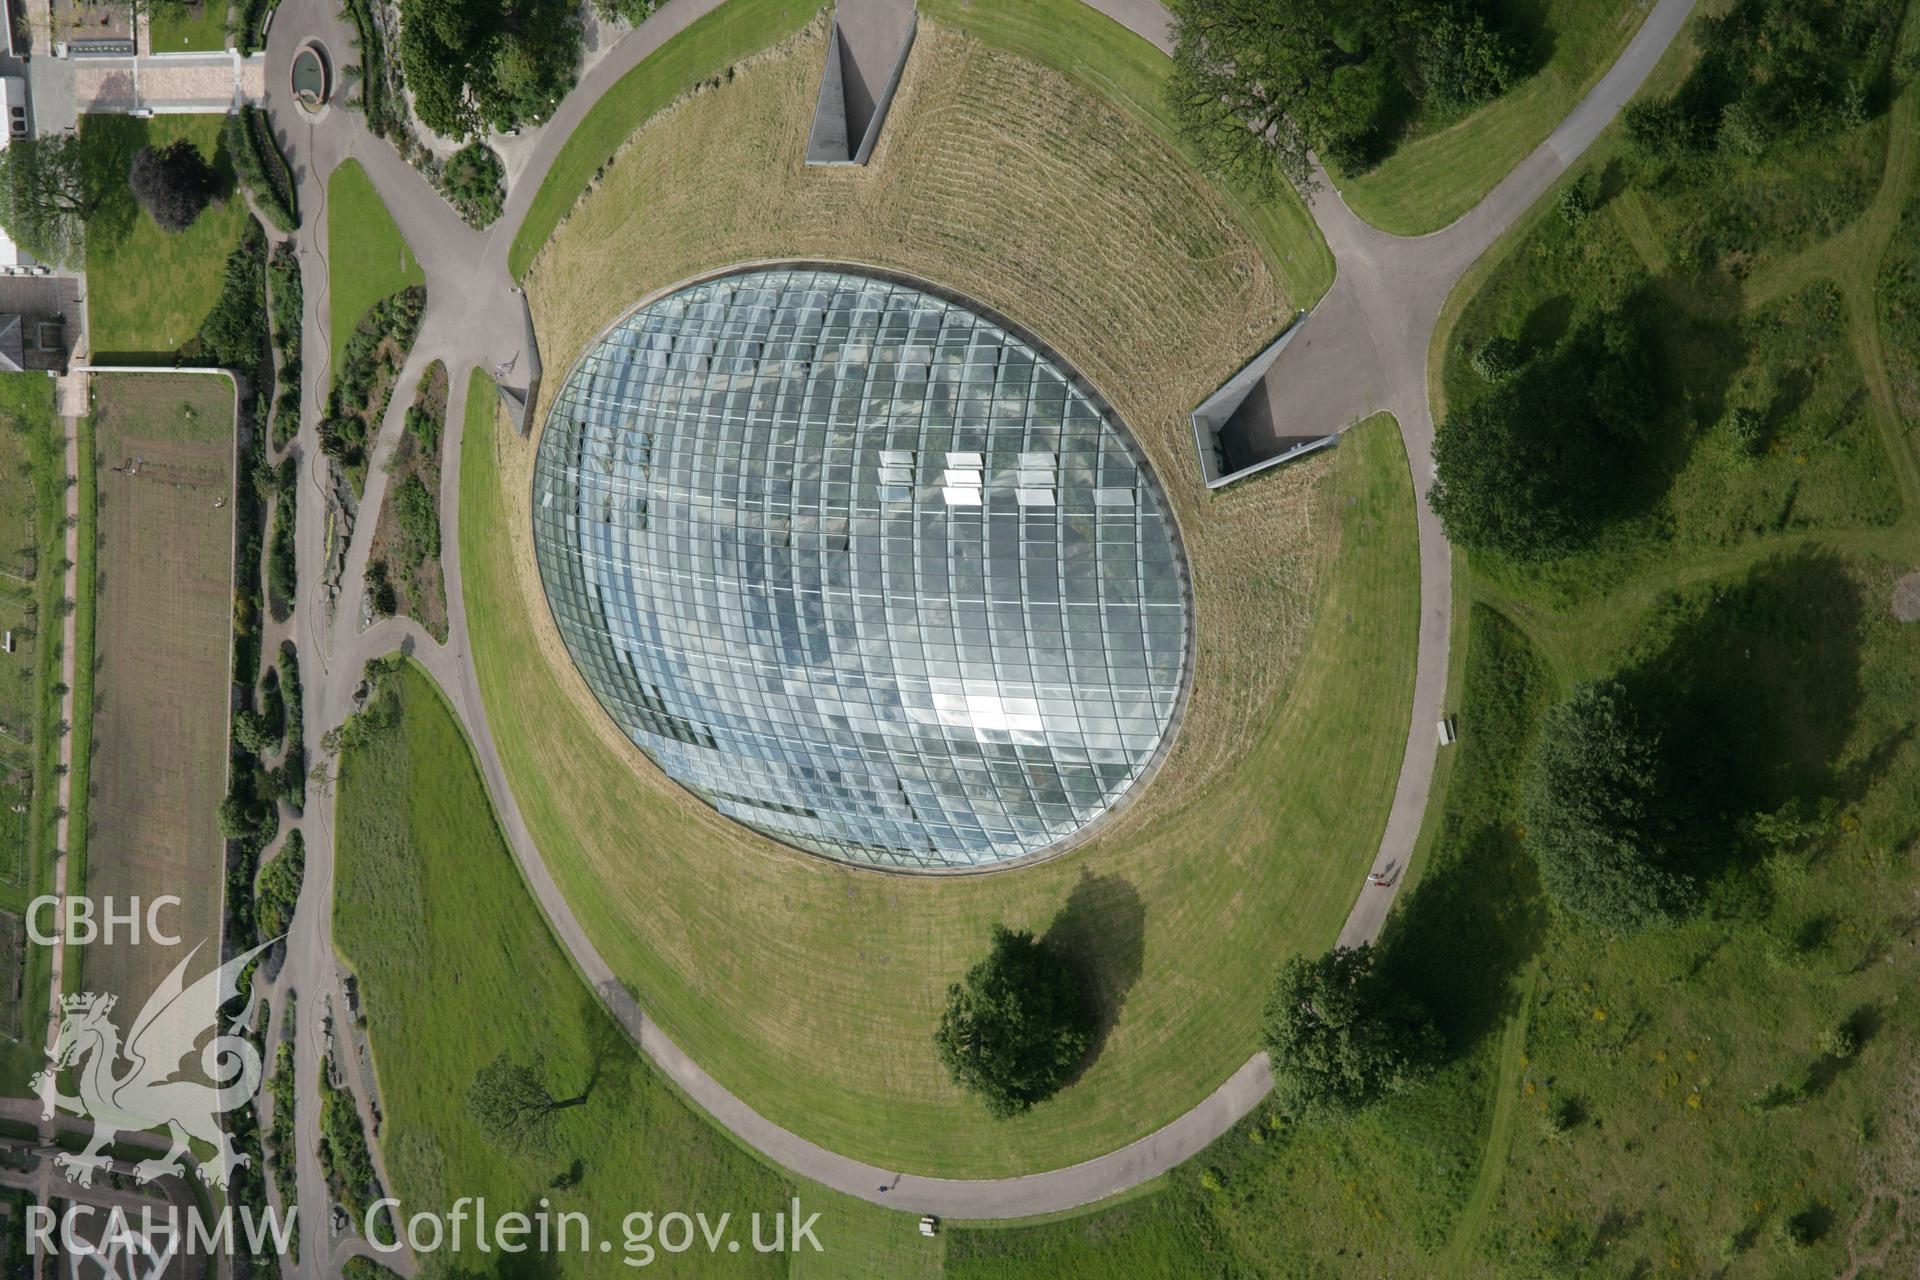 RCAHMW colour oblique aerial photograph of The Great Glasshouse, National Botanic Gardens of Wales, from the south-east. Taken on 09 June 2005 by Toby Driver